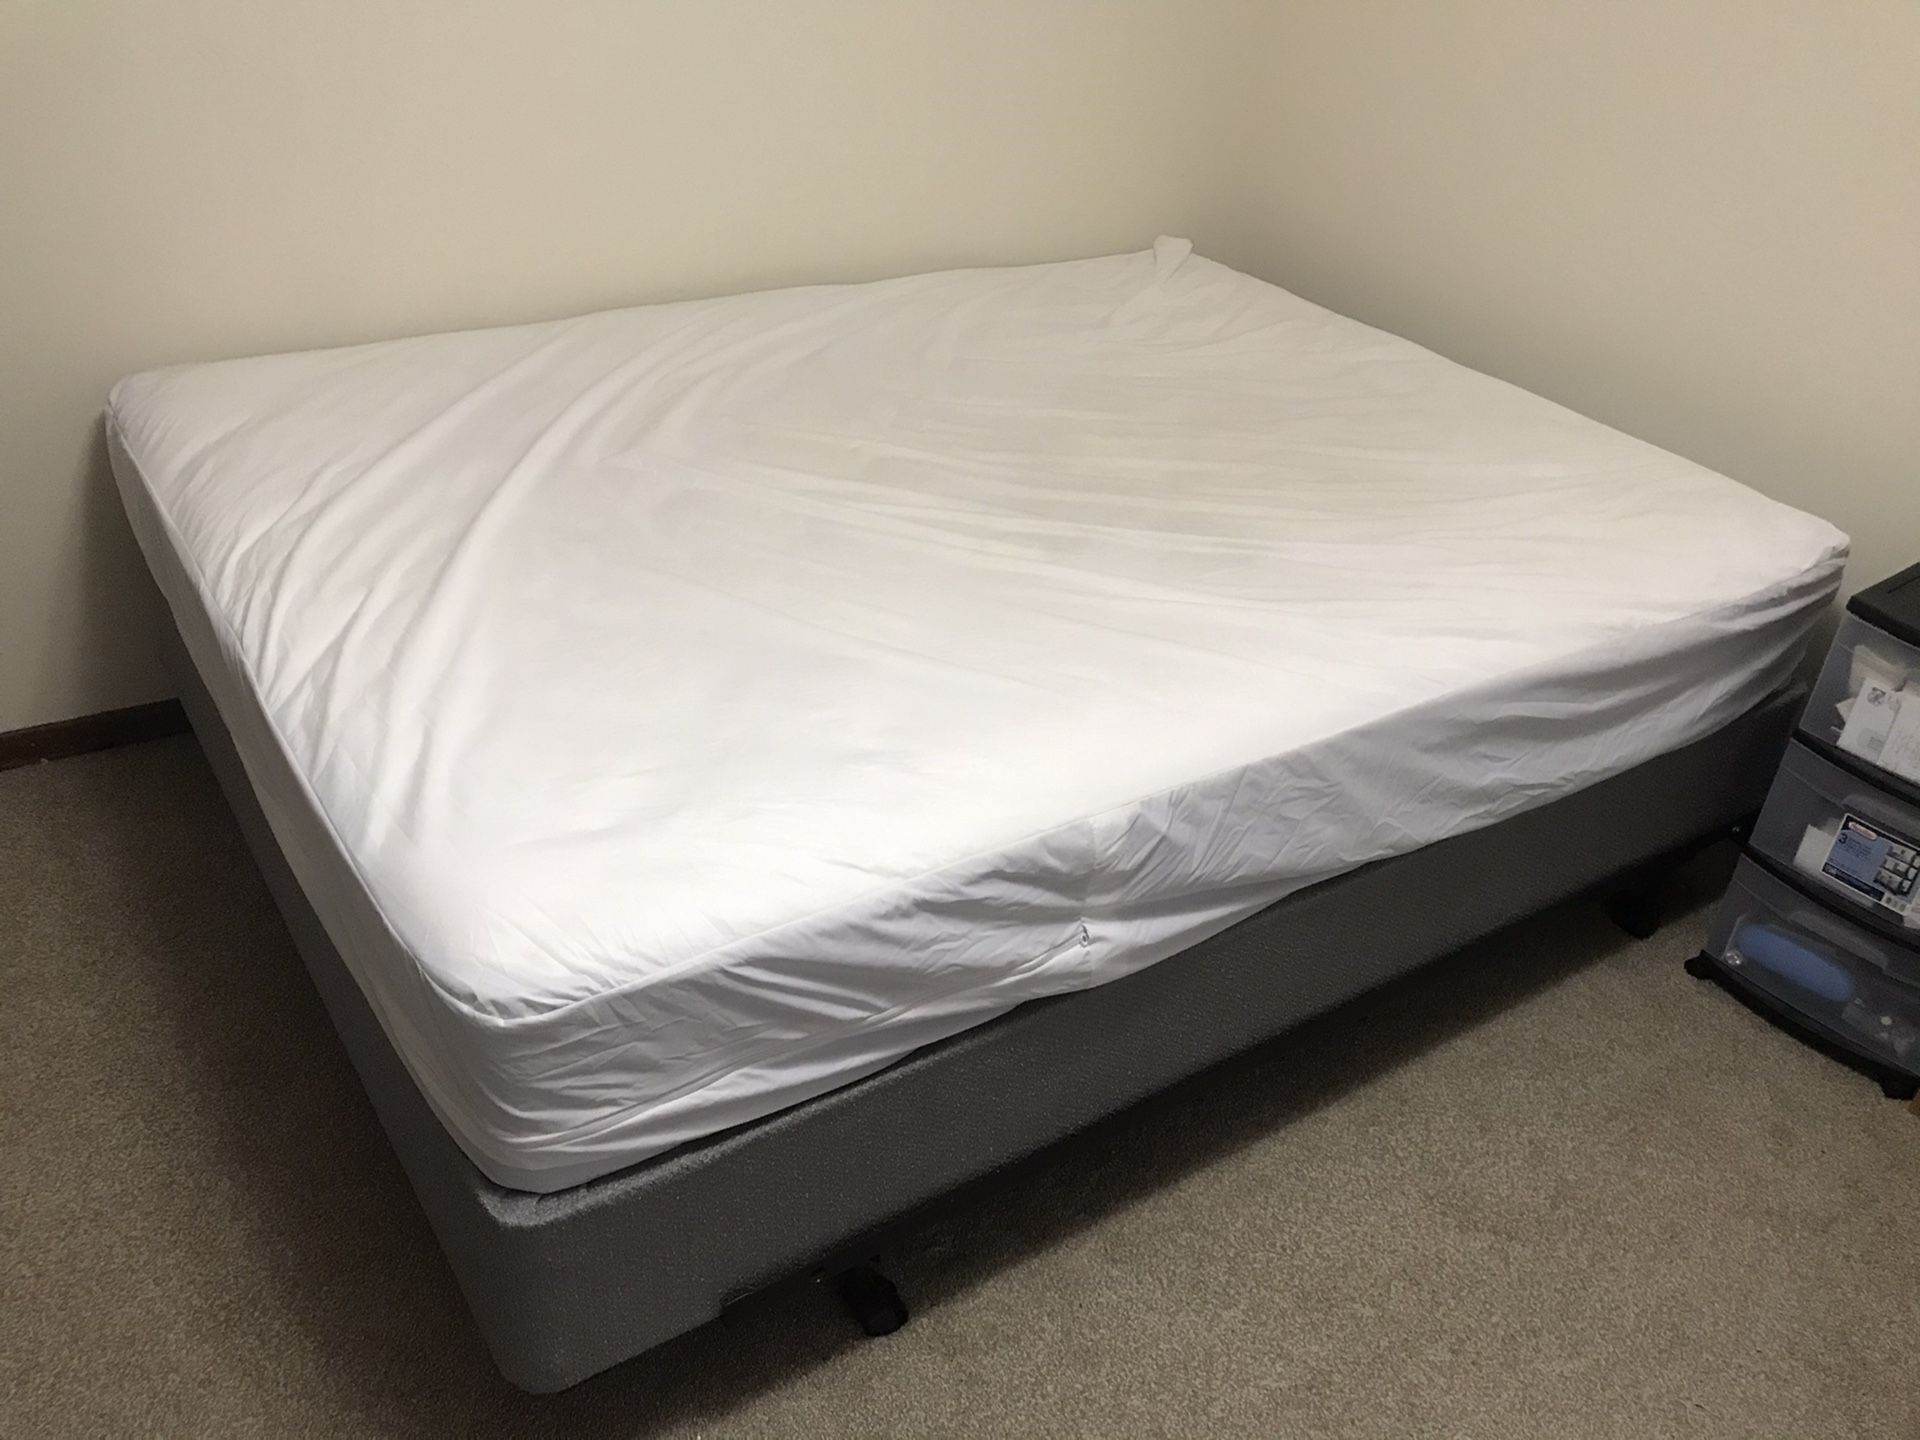 Queen-sized Mattress (Denver Mattress Co.)with waterproof cover, box spring, and bed frame all included